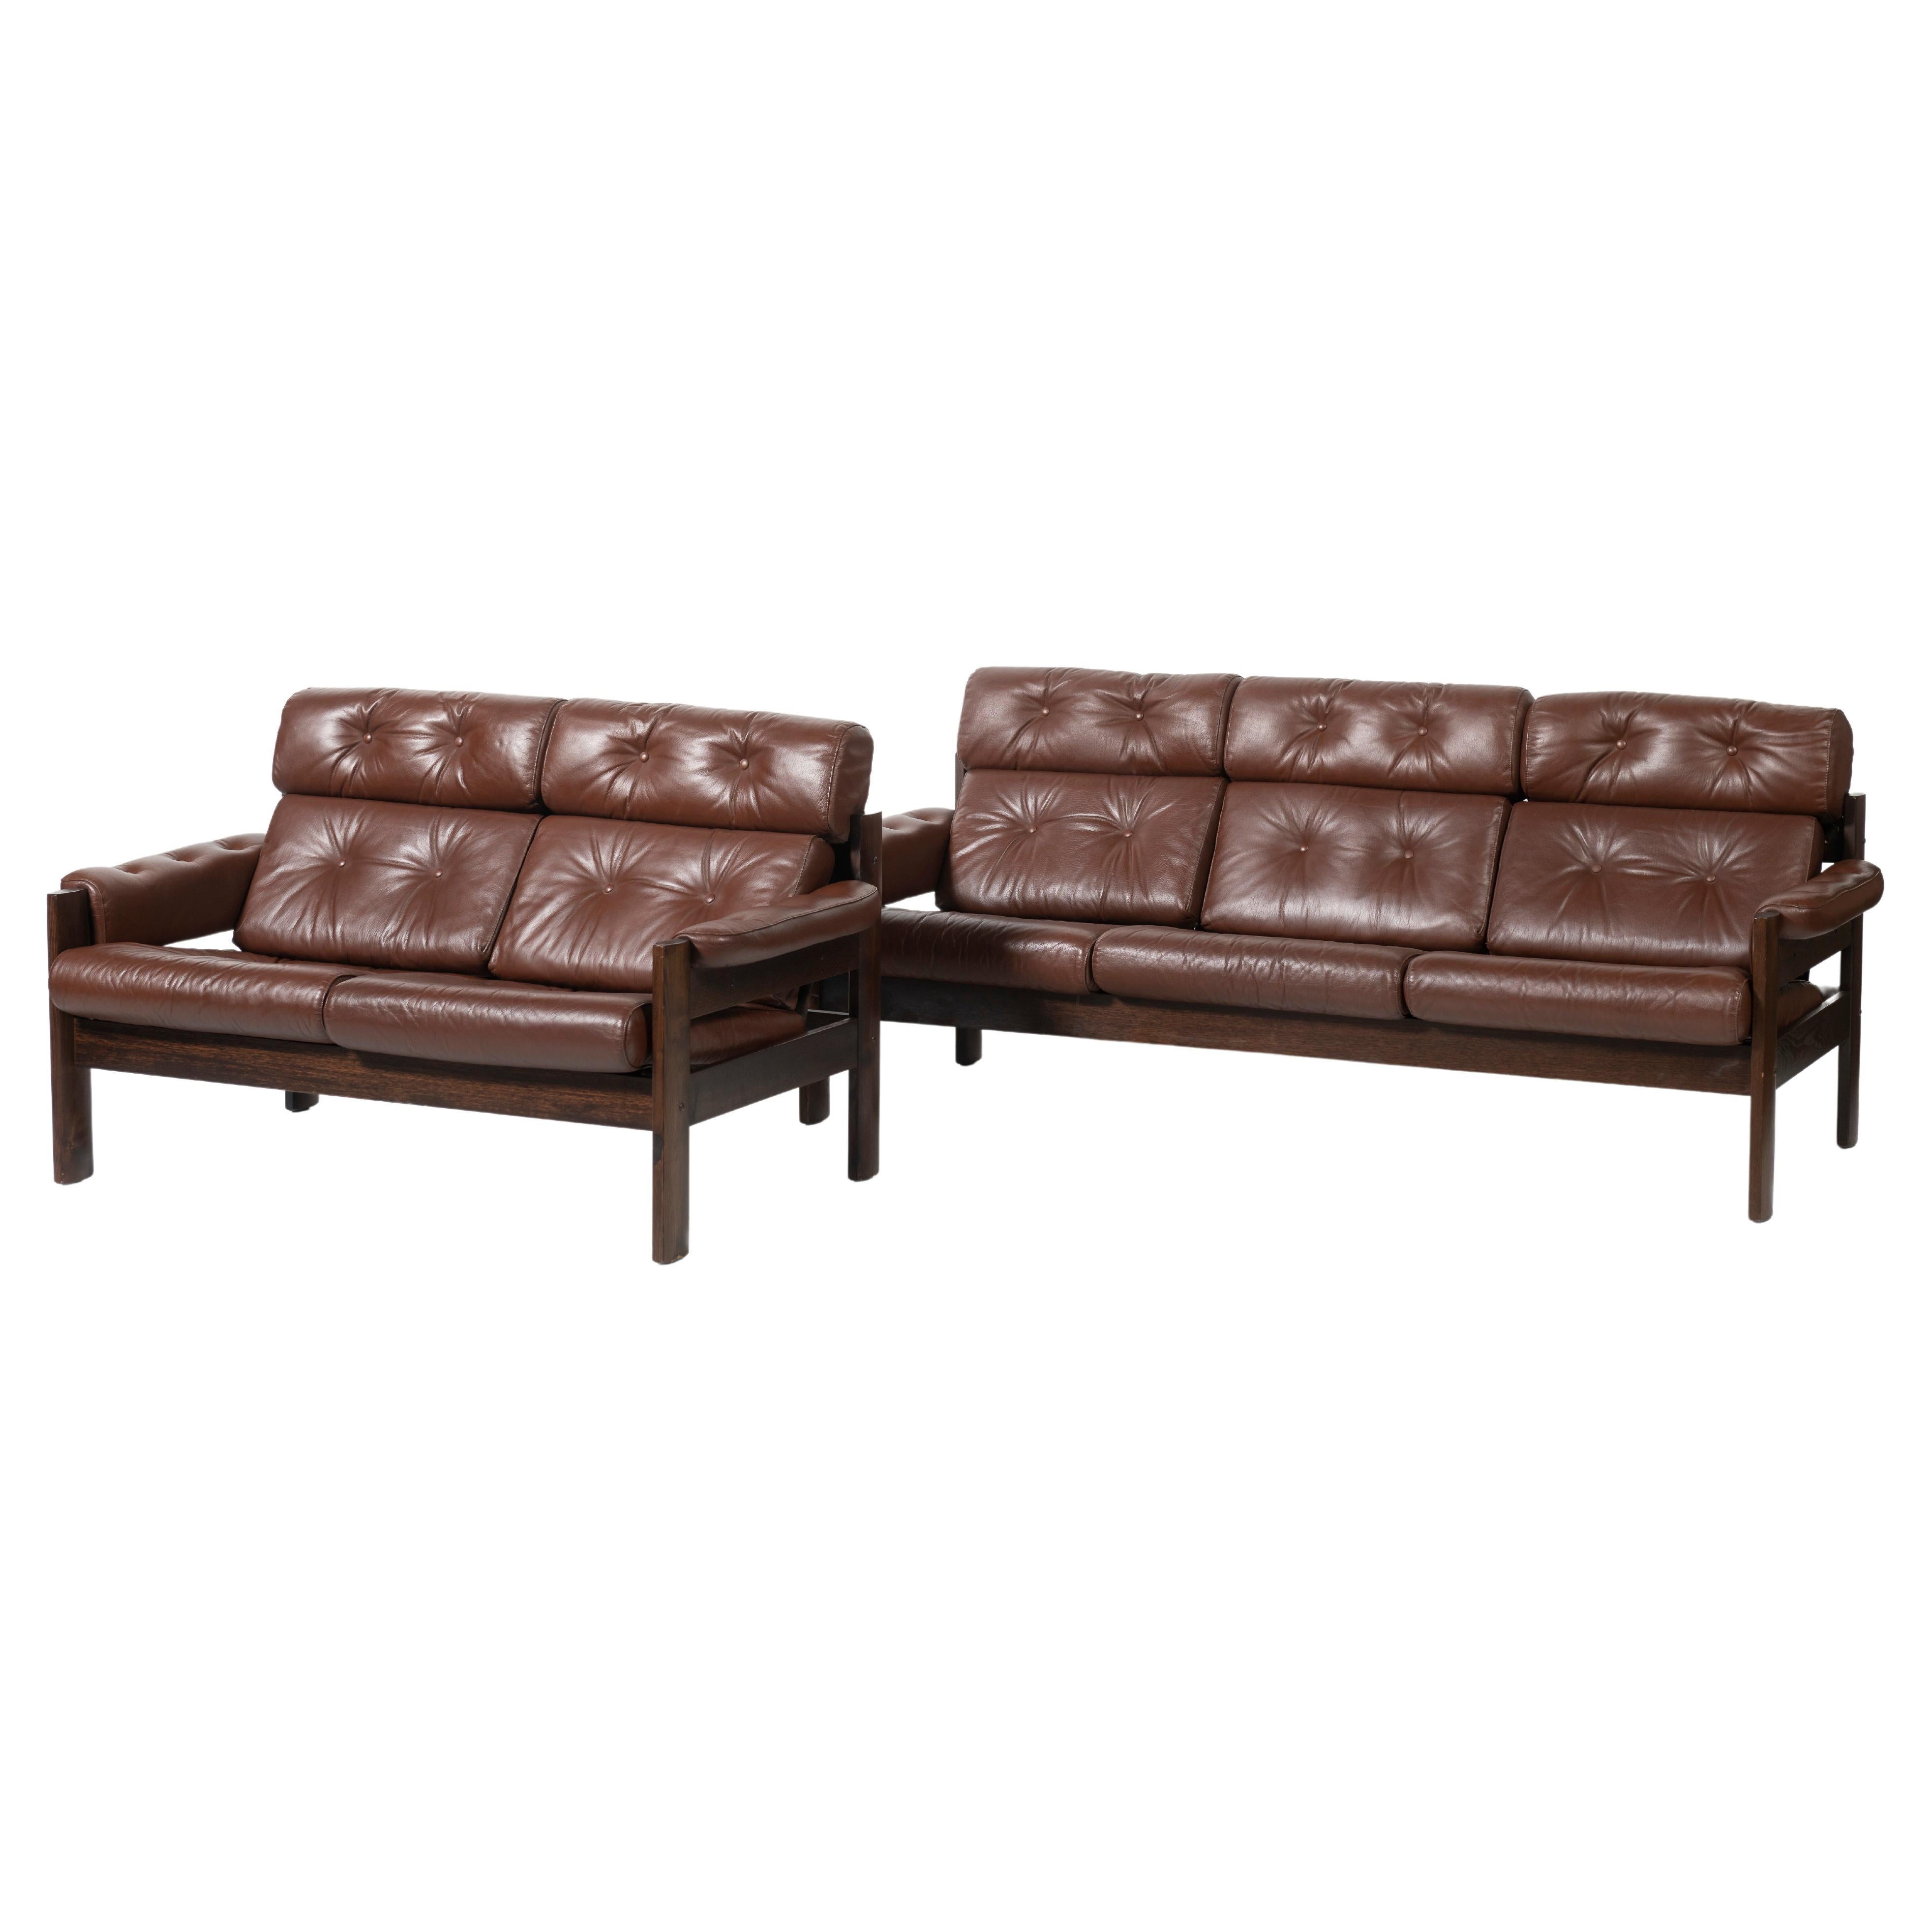 1970's Three Seat Tufted Sofa and Loveseat Set in Leather and Rosewood, Norway For Sale